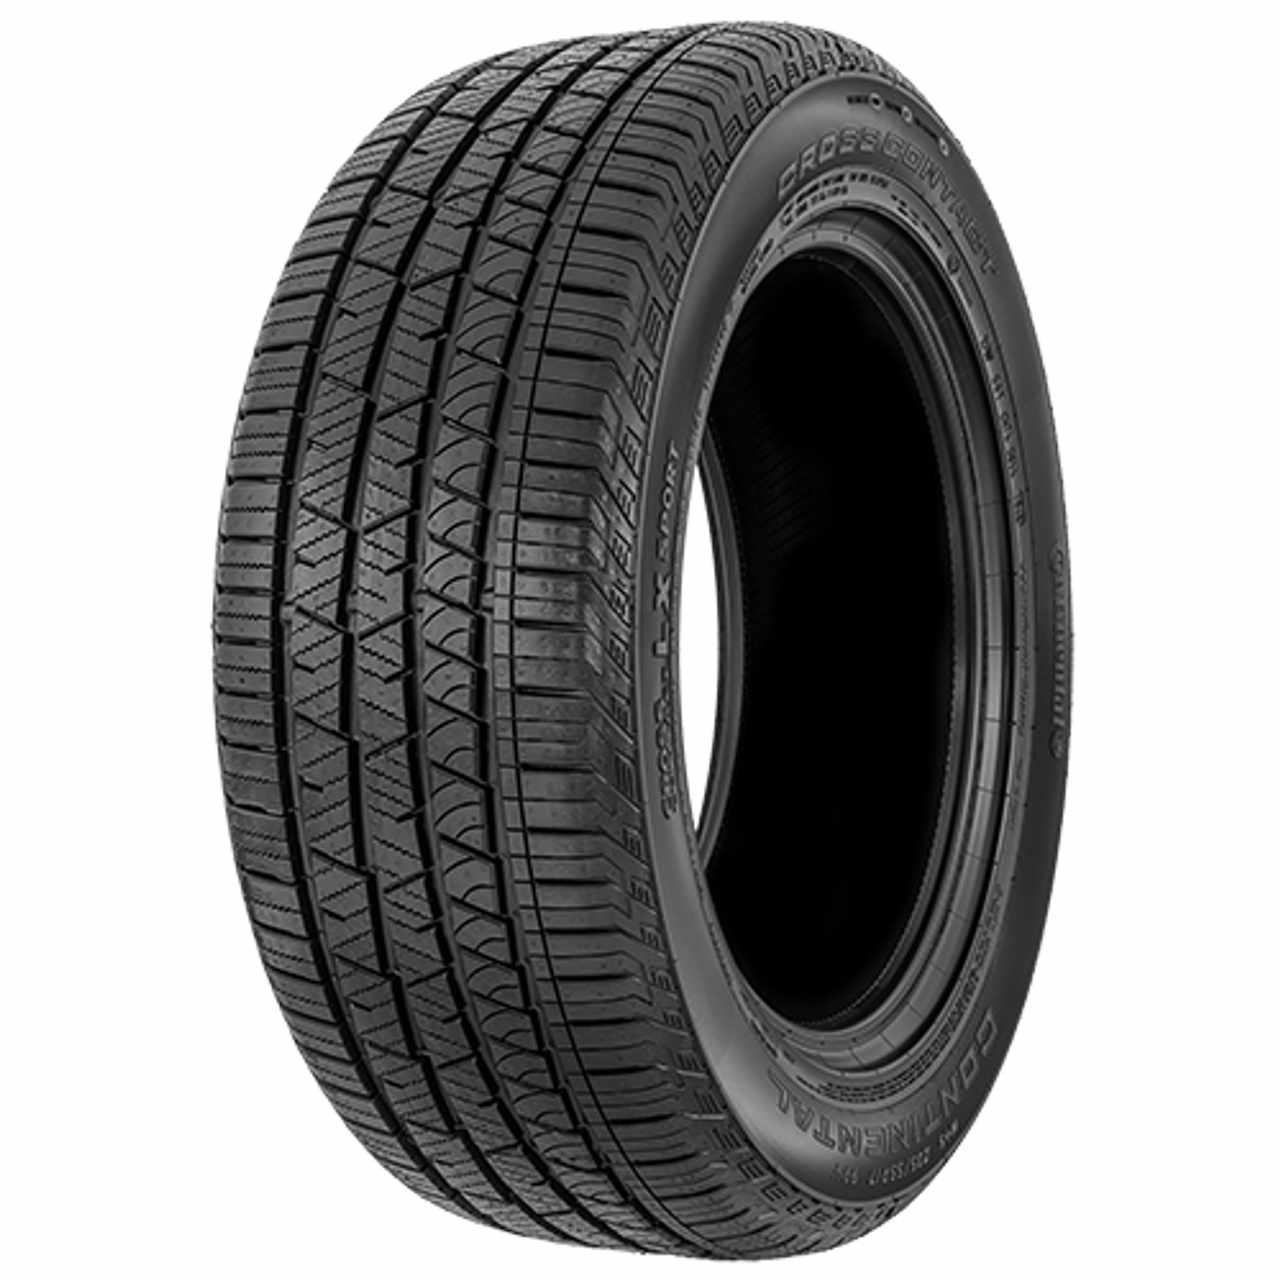 CONTINENTAL CROSSCONTACT LX SPORT (T1) (EVc) 275/45R20 110V CONTISILENT FR BSW